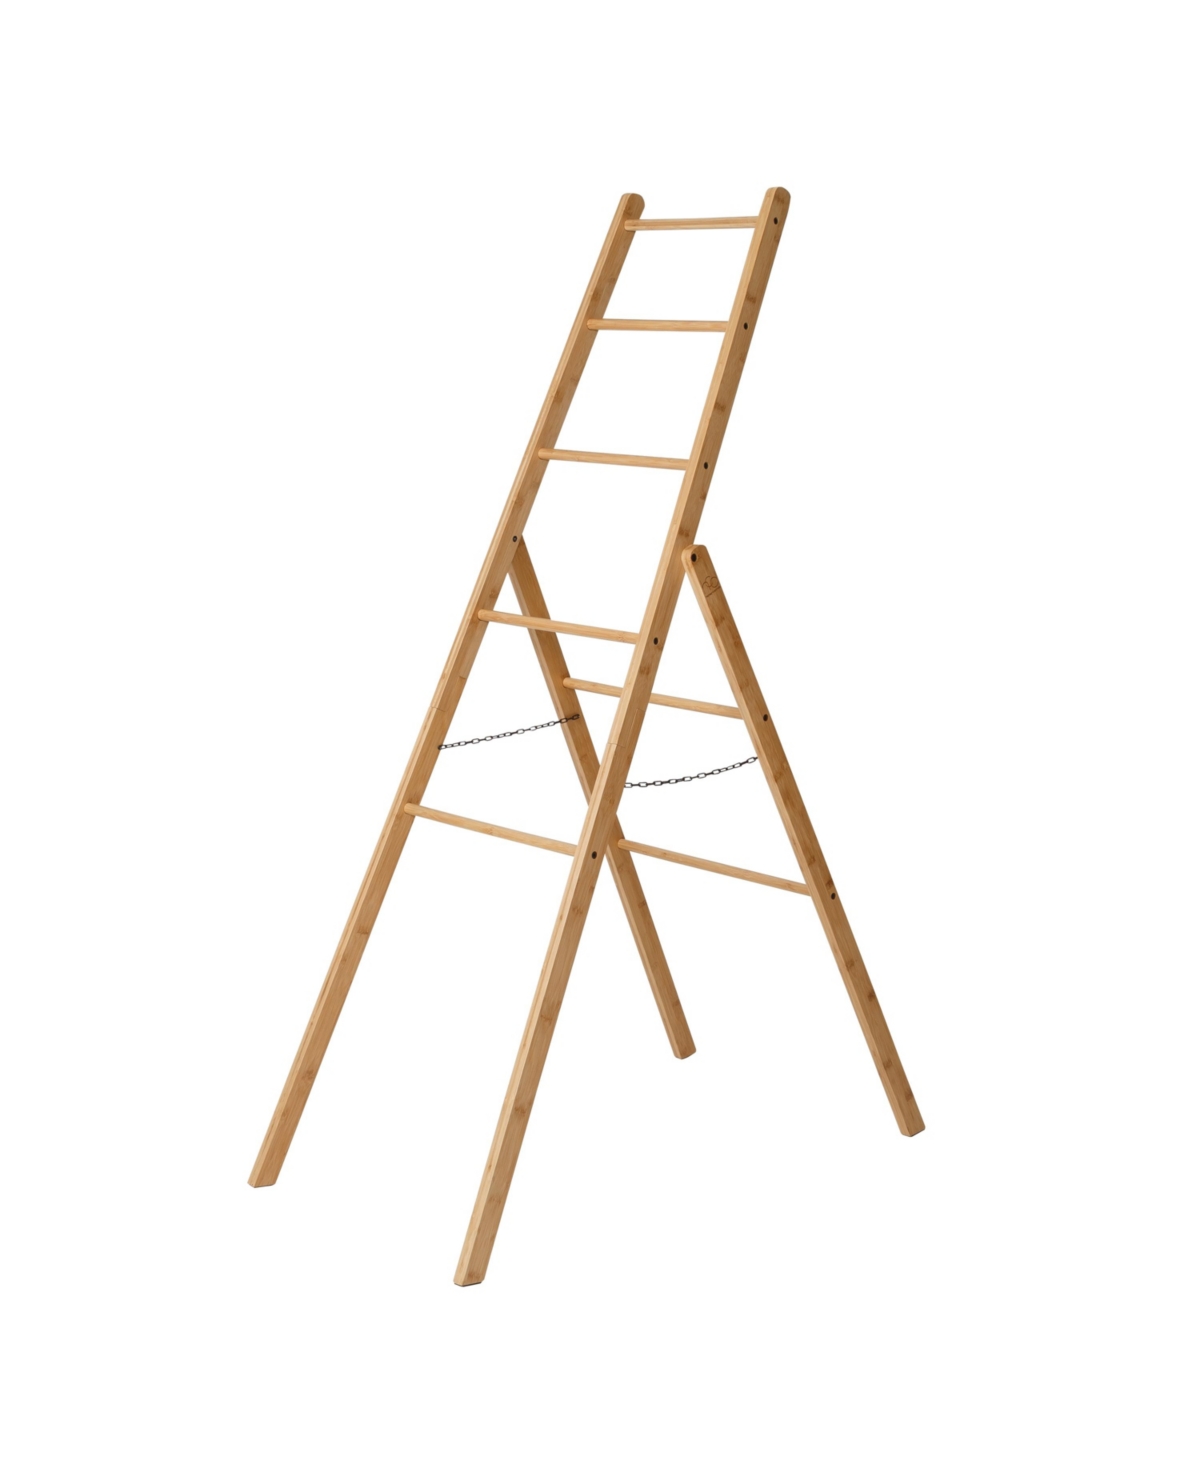 Honey Can Do Bamboo Clothes Drying Ladder Rack In Natural